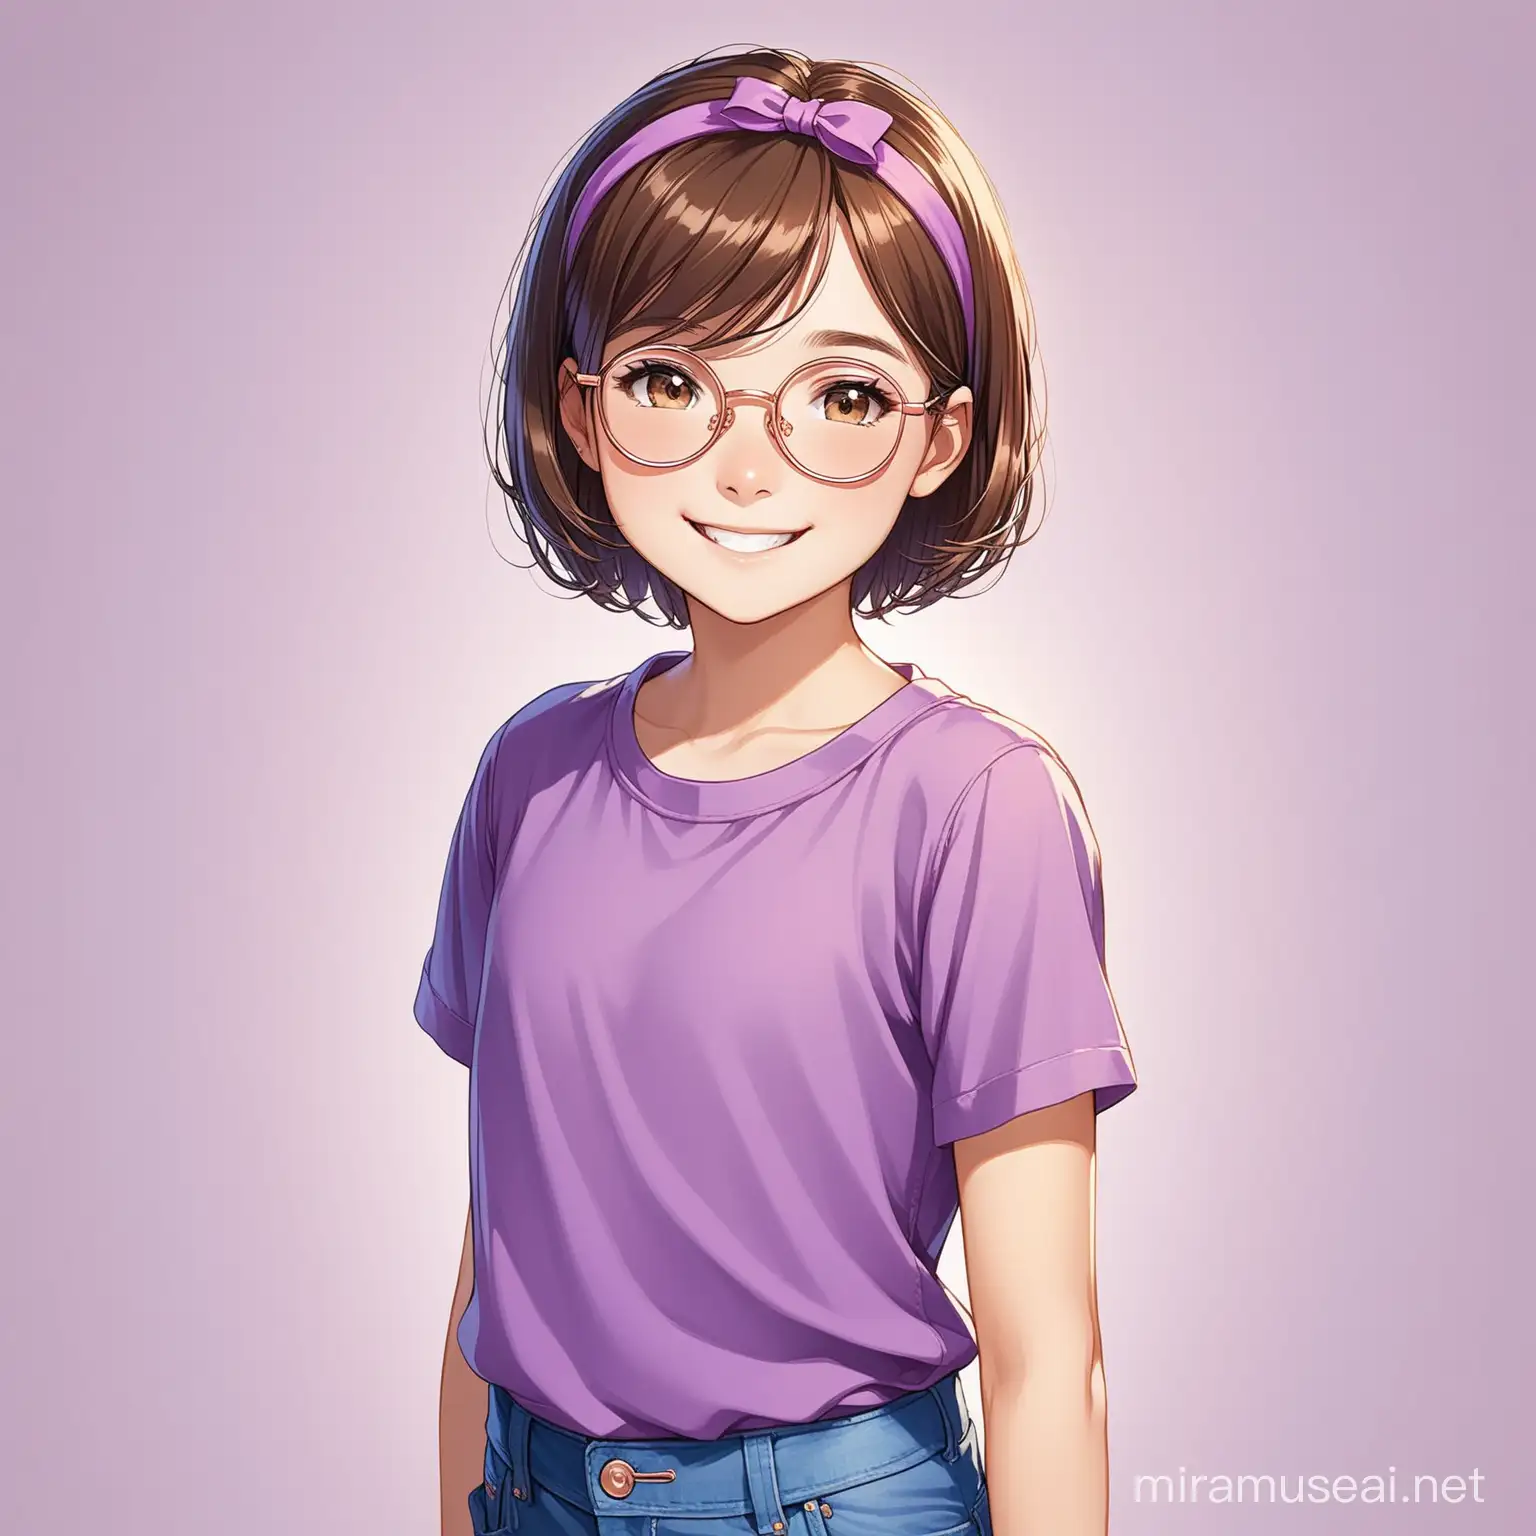 Smiling 12YearOld Girl with Rose Gold Glasses and Headband in Purple Shirt and Jeans